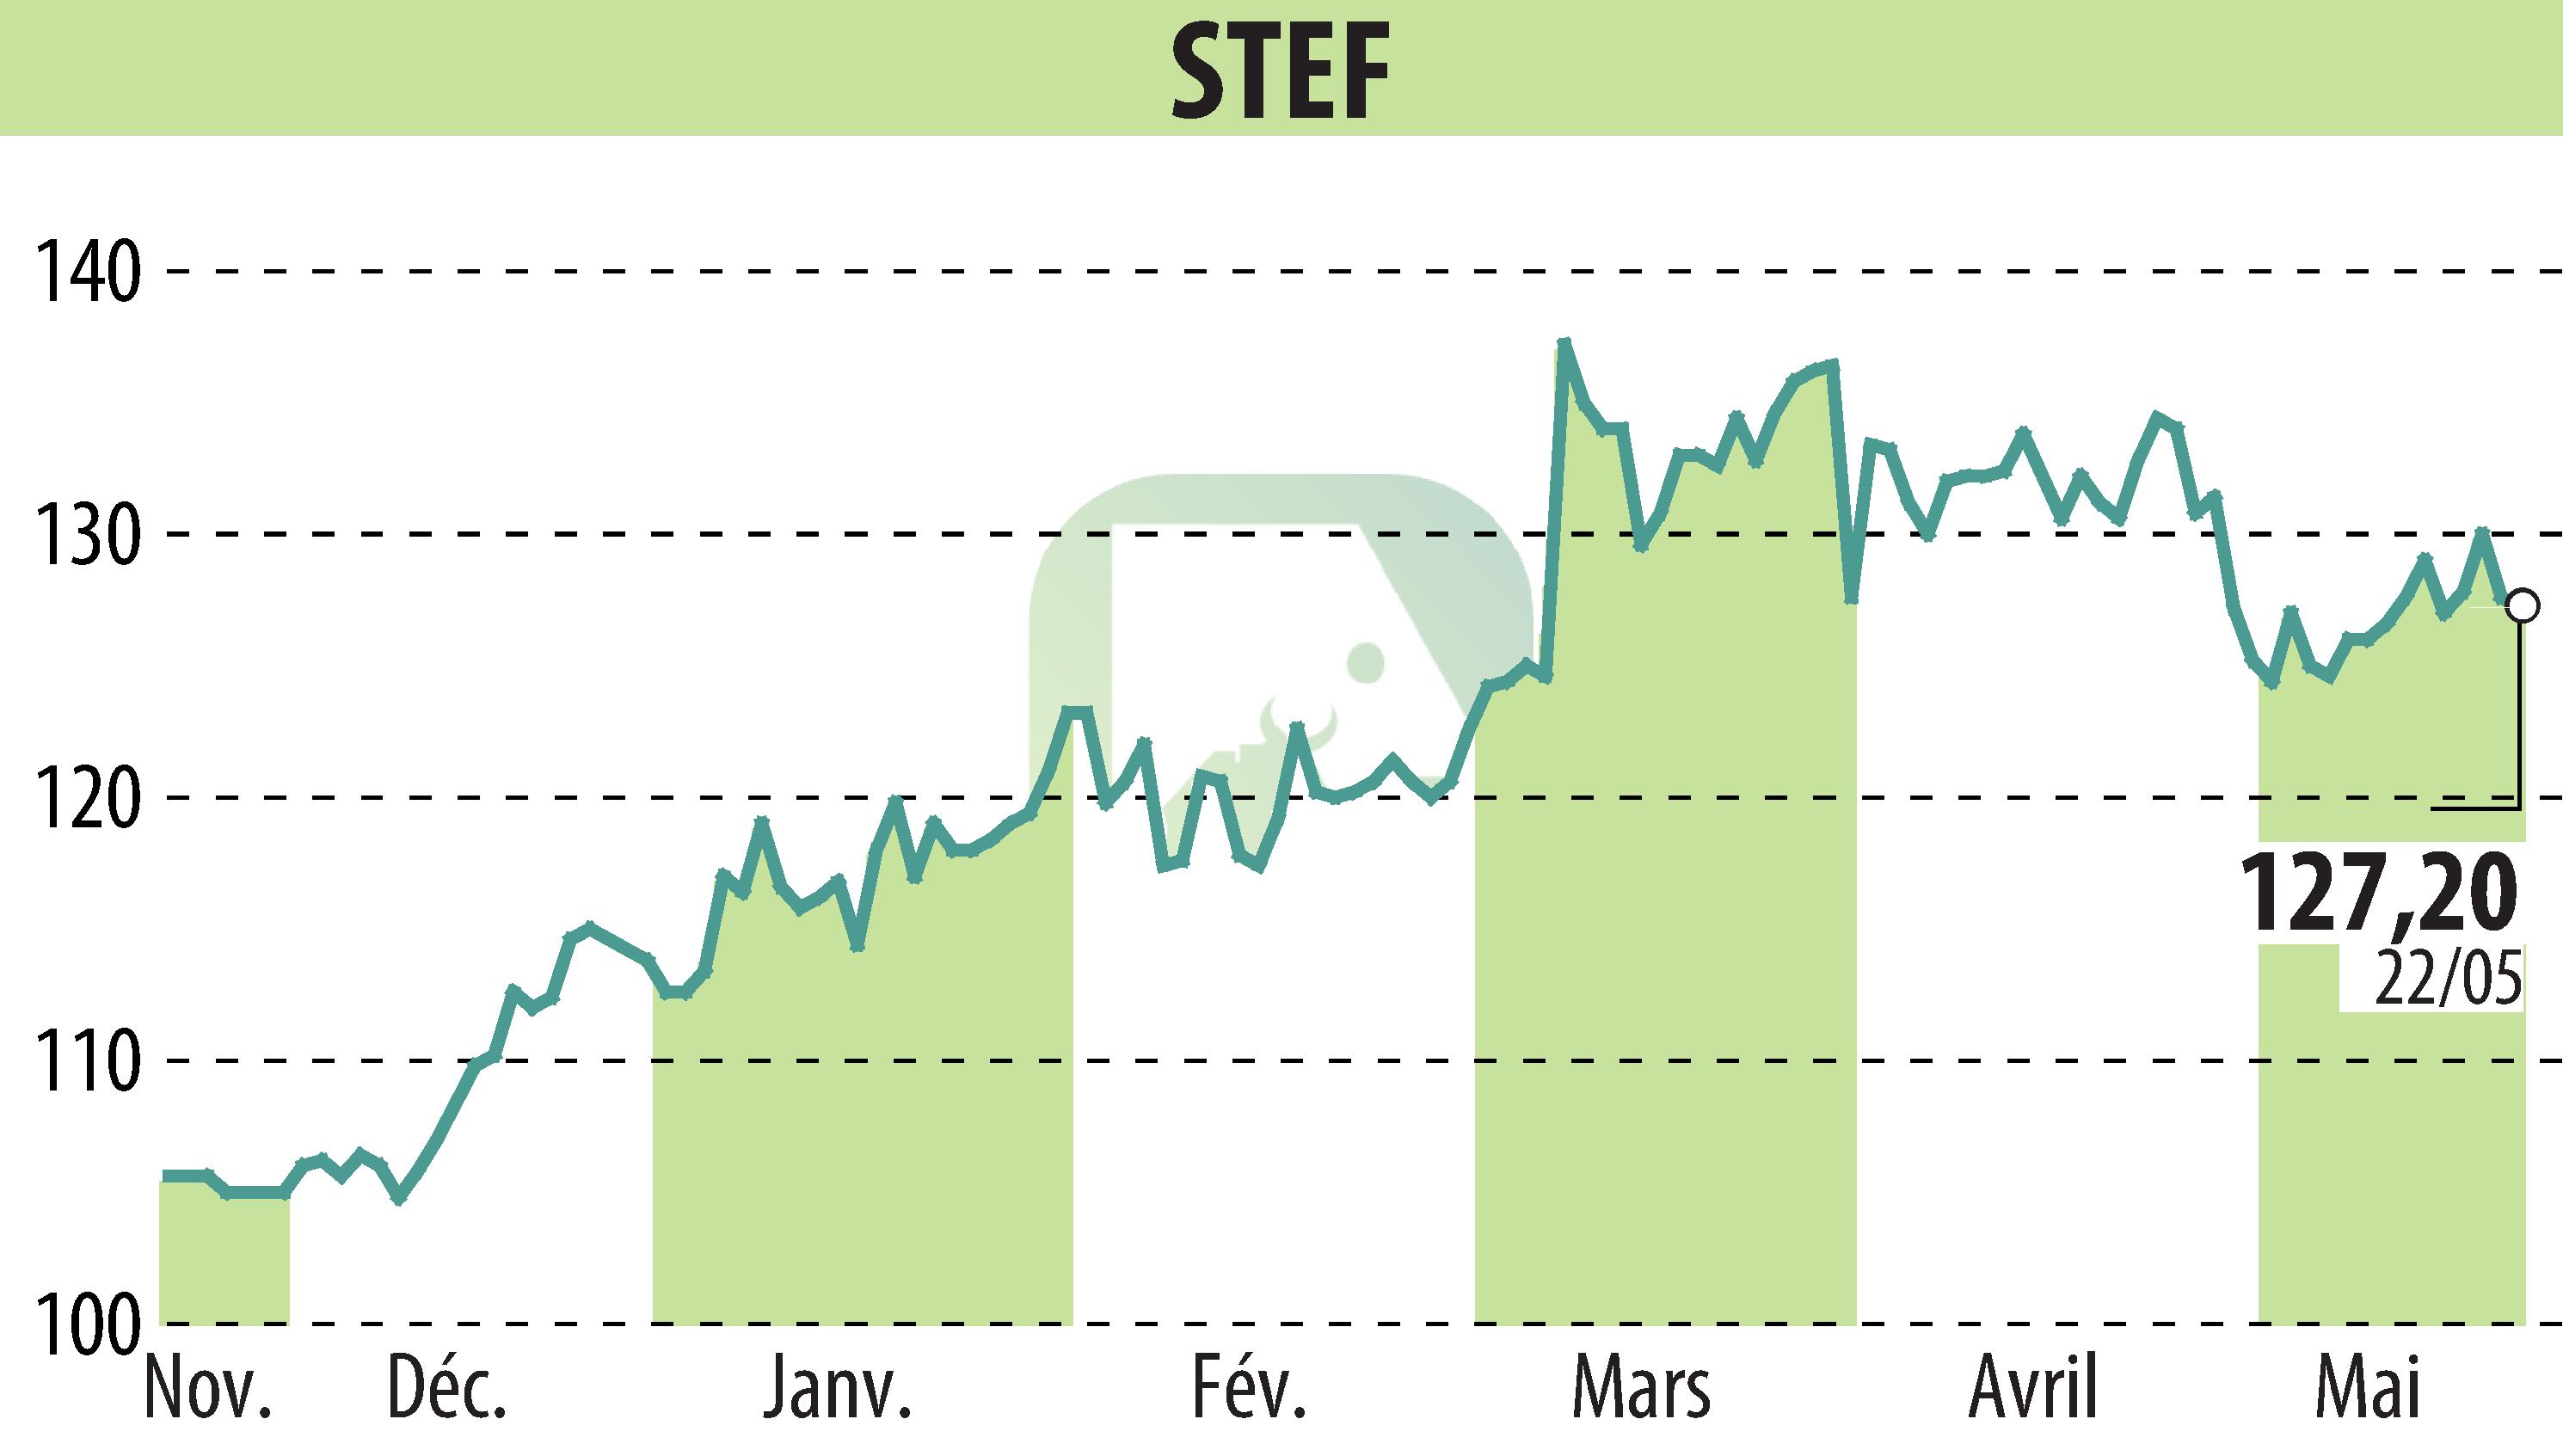 Stock price chart of STEF (EPA:STF) showing fluctuations.